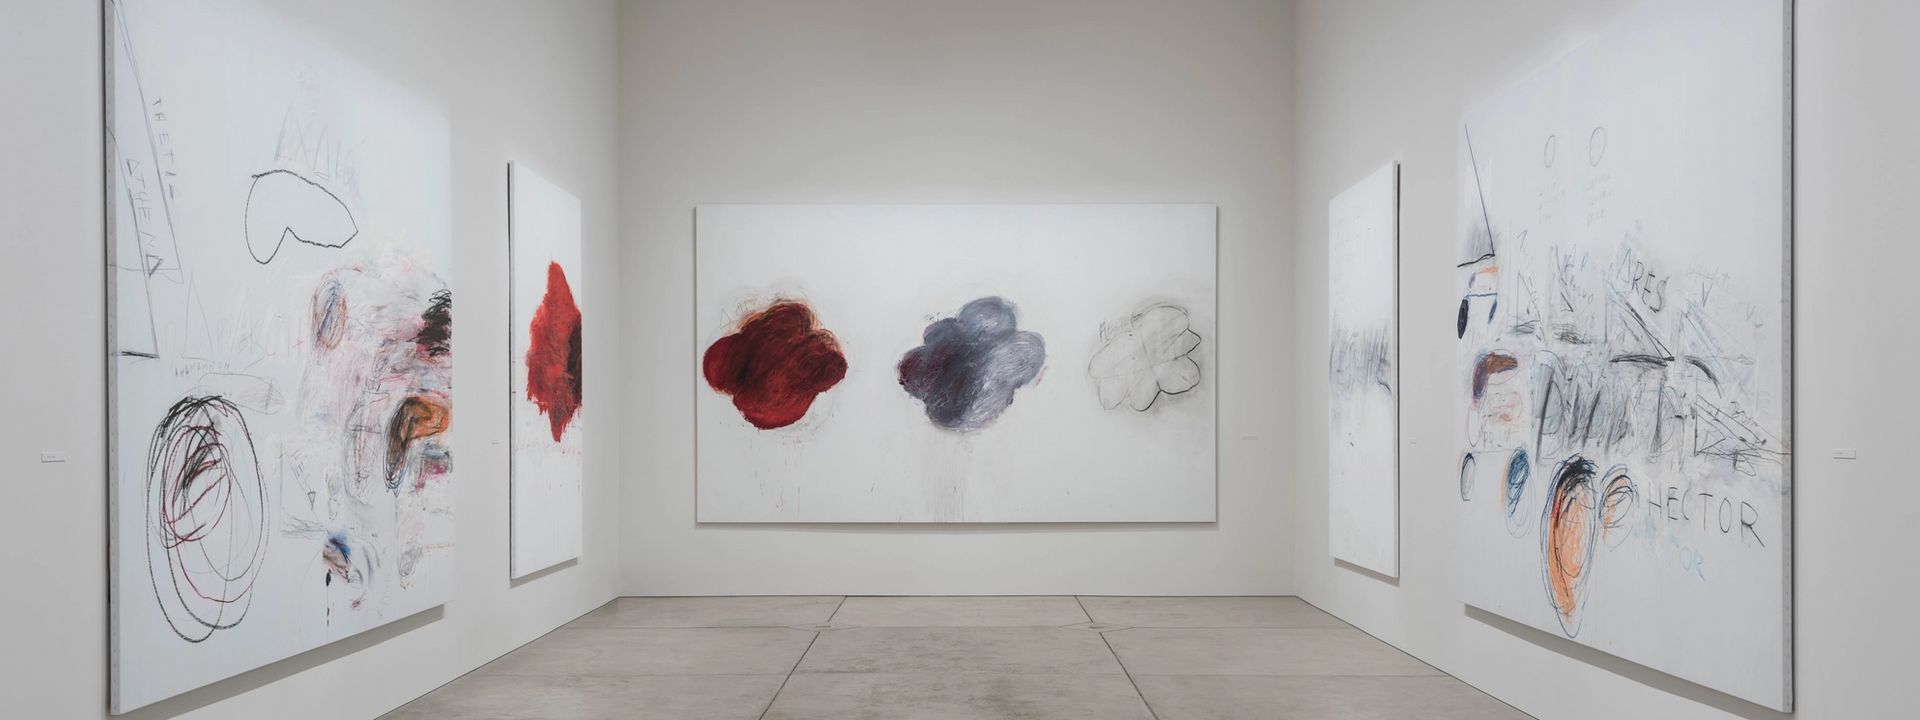 Fifty Days at Iliam, 1978, by Cy Twombly